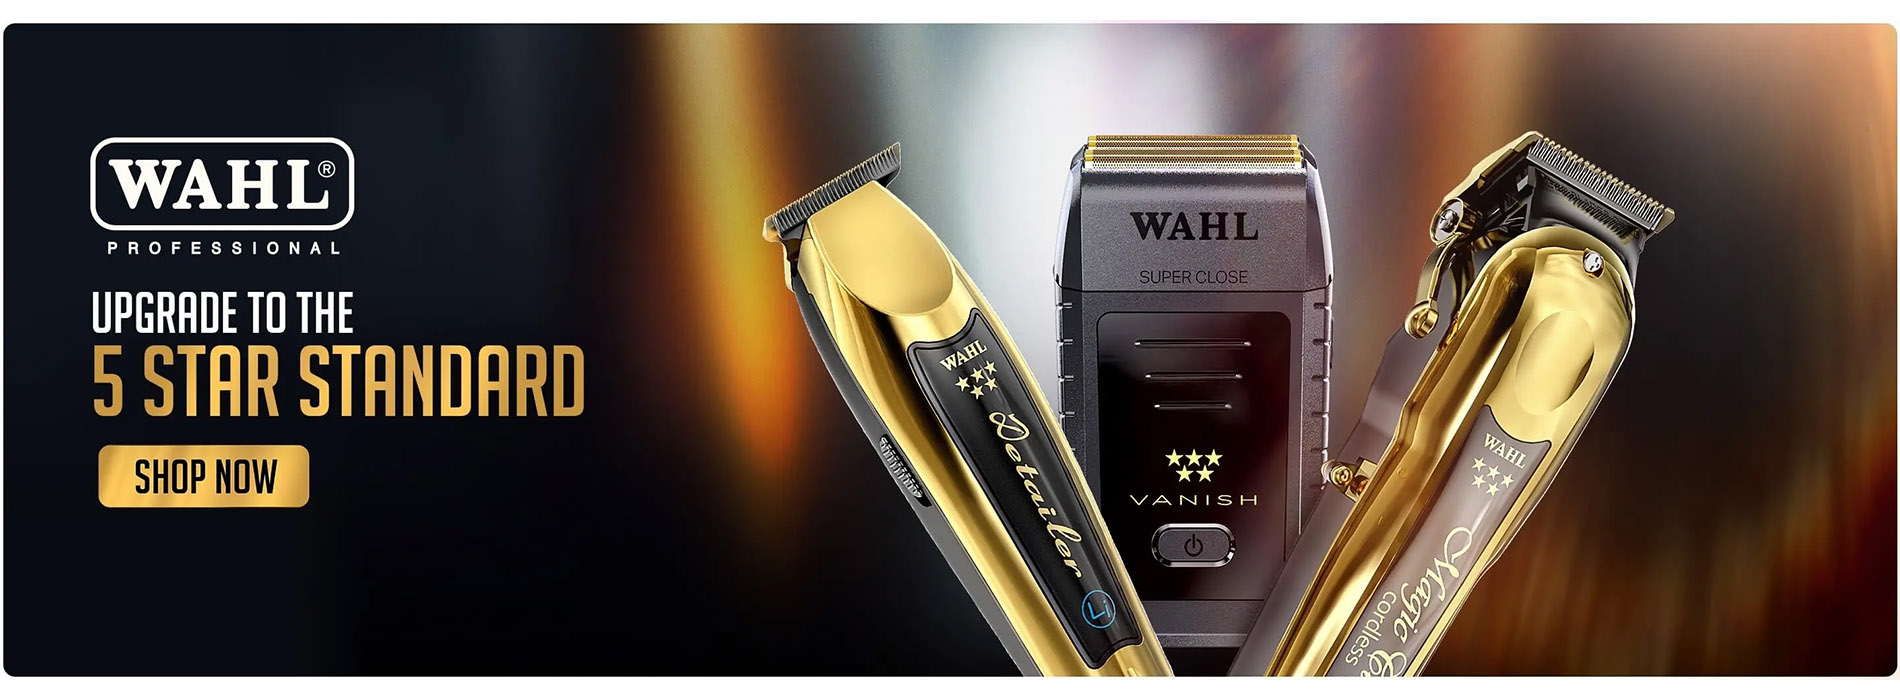 https://www.salonsdirect.com.au/catalogsearch/result/?q=wahl+gold